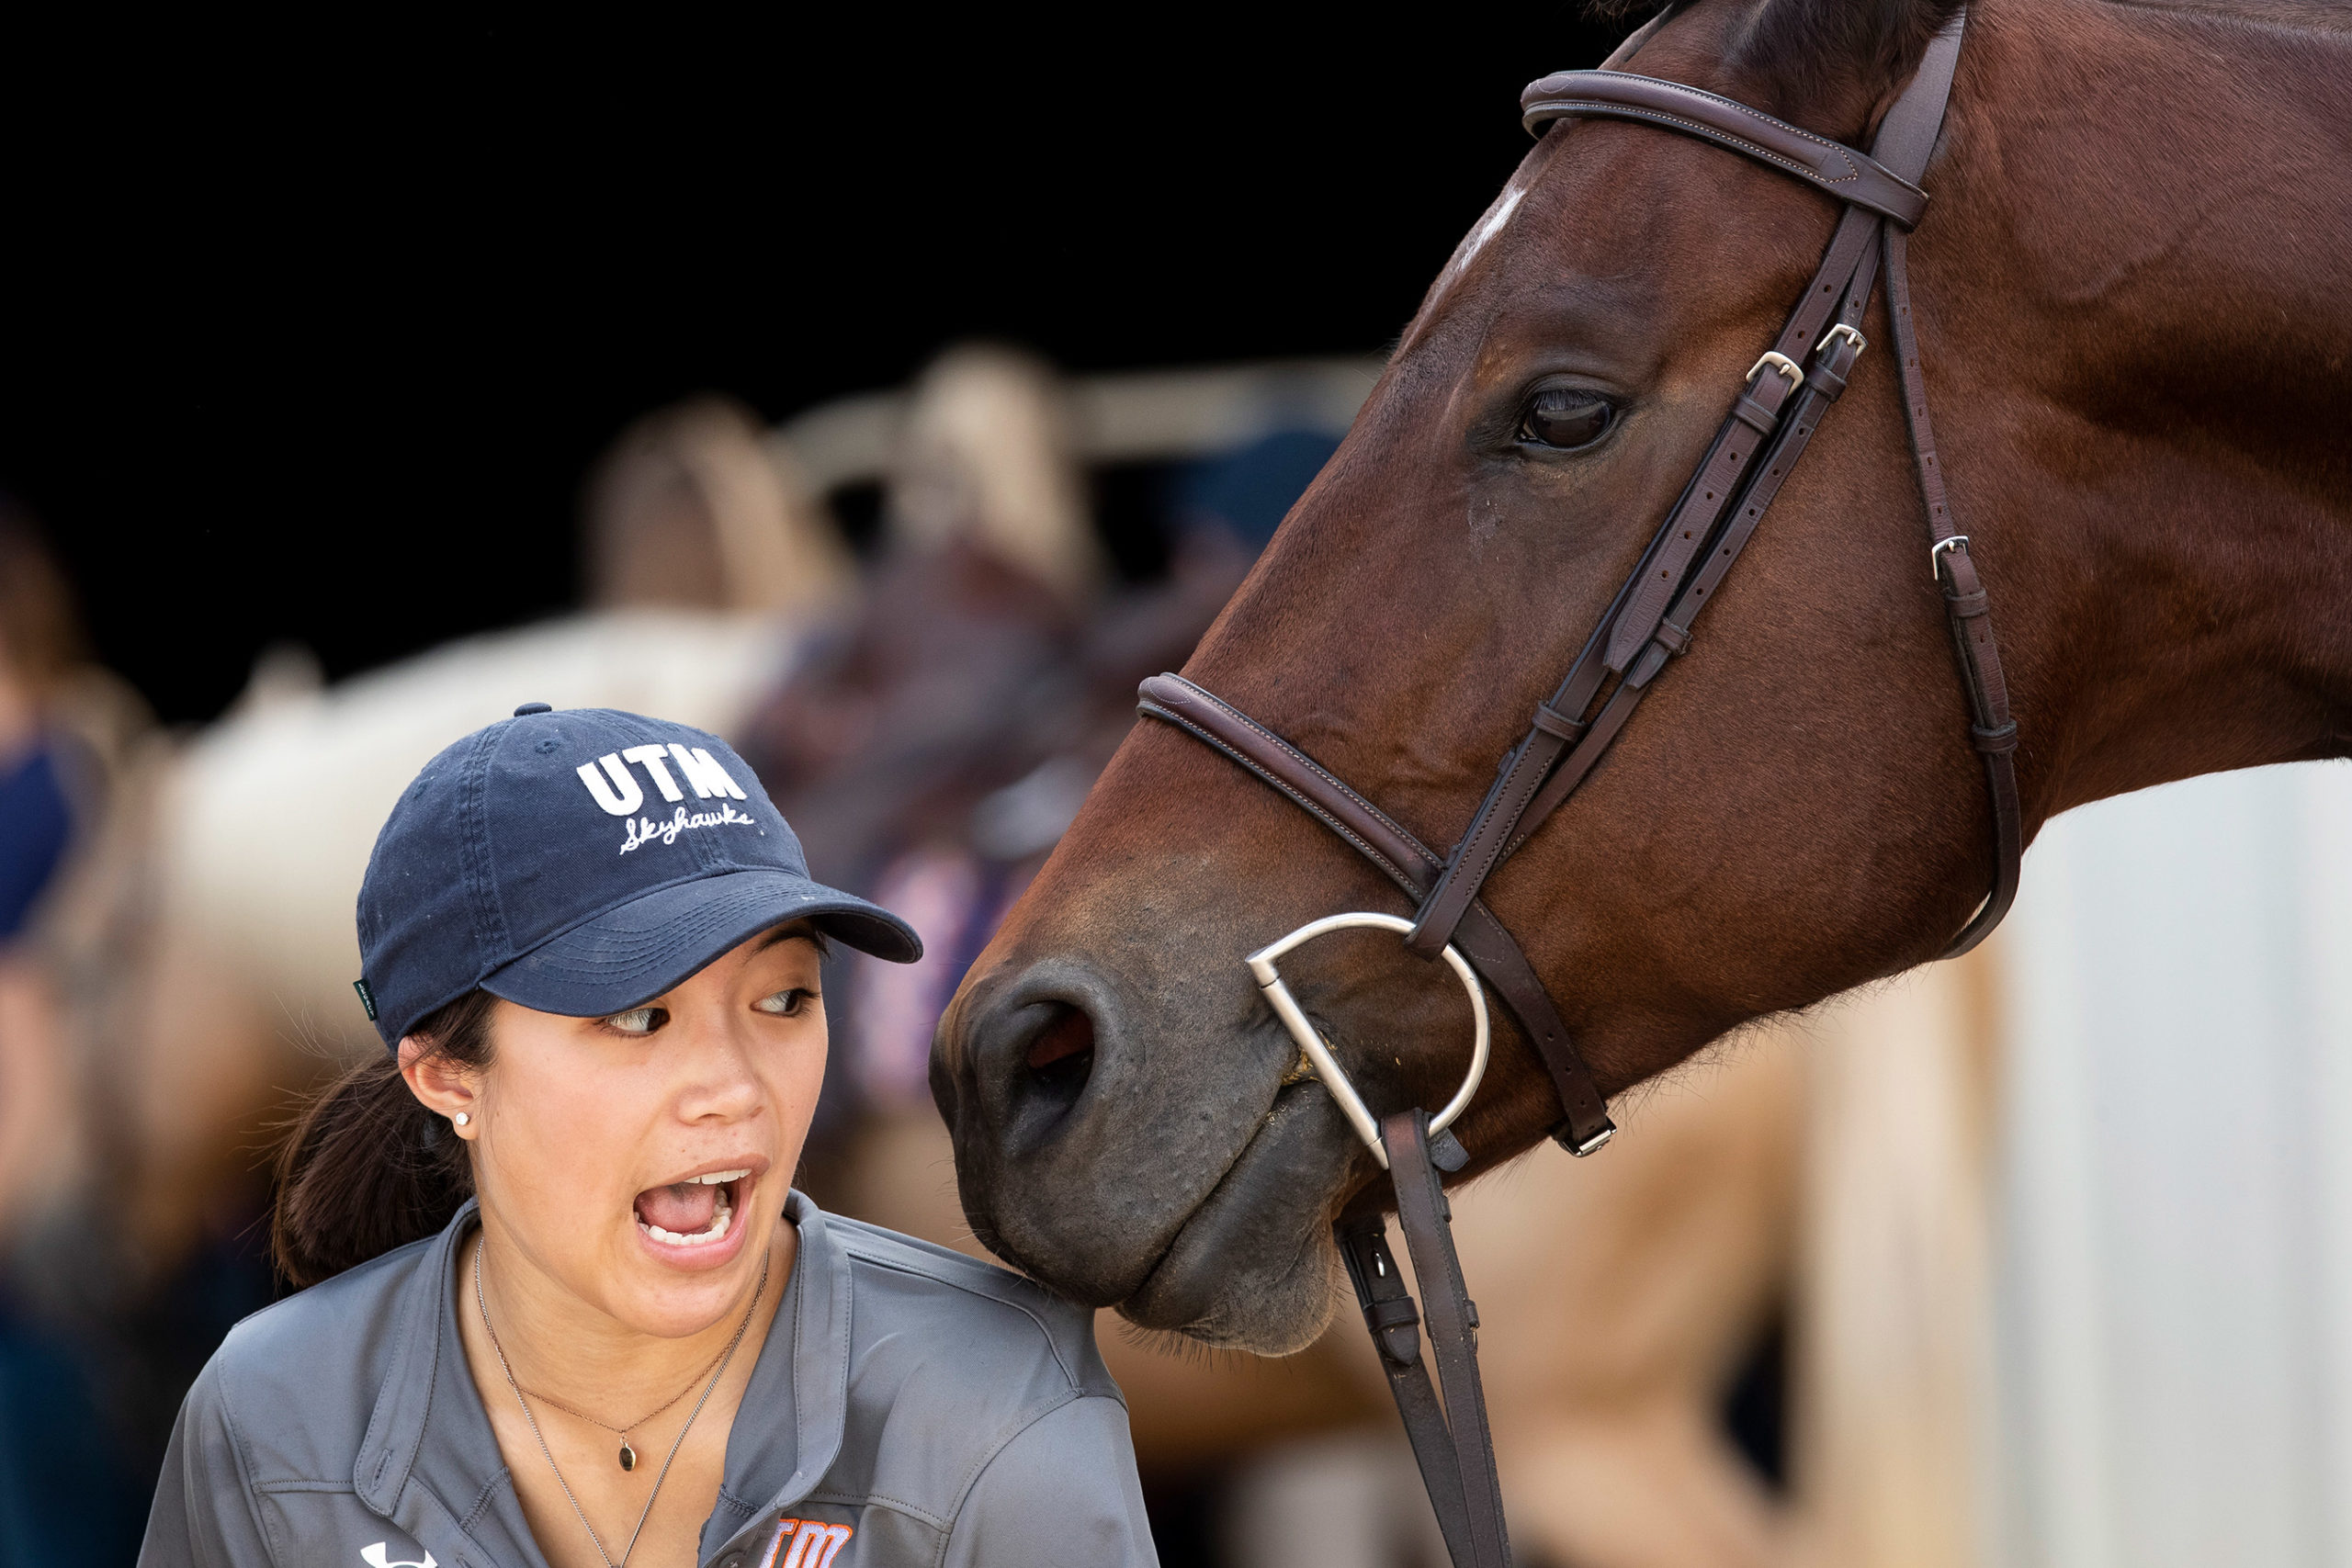 A chestnut horse displays affection with a young woman in a UTM Skyhawks cap